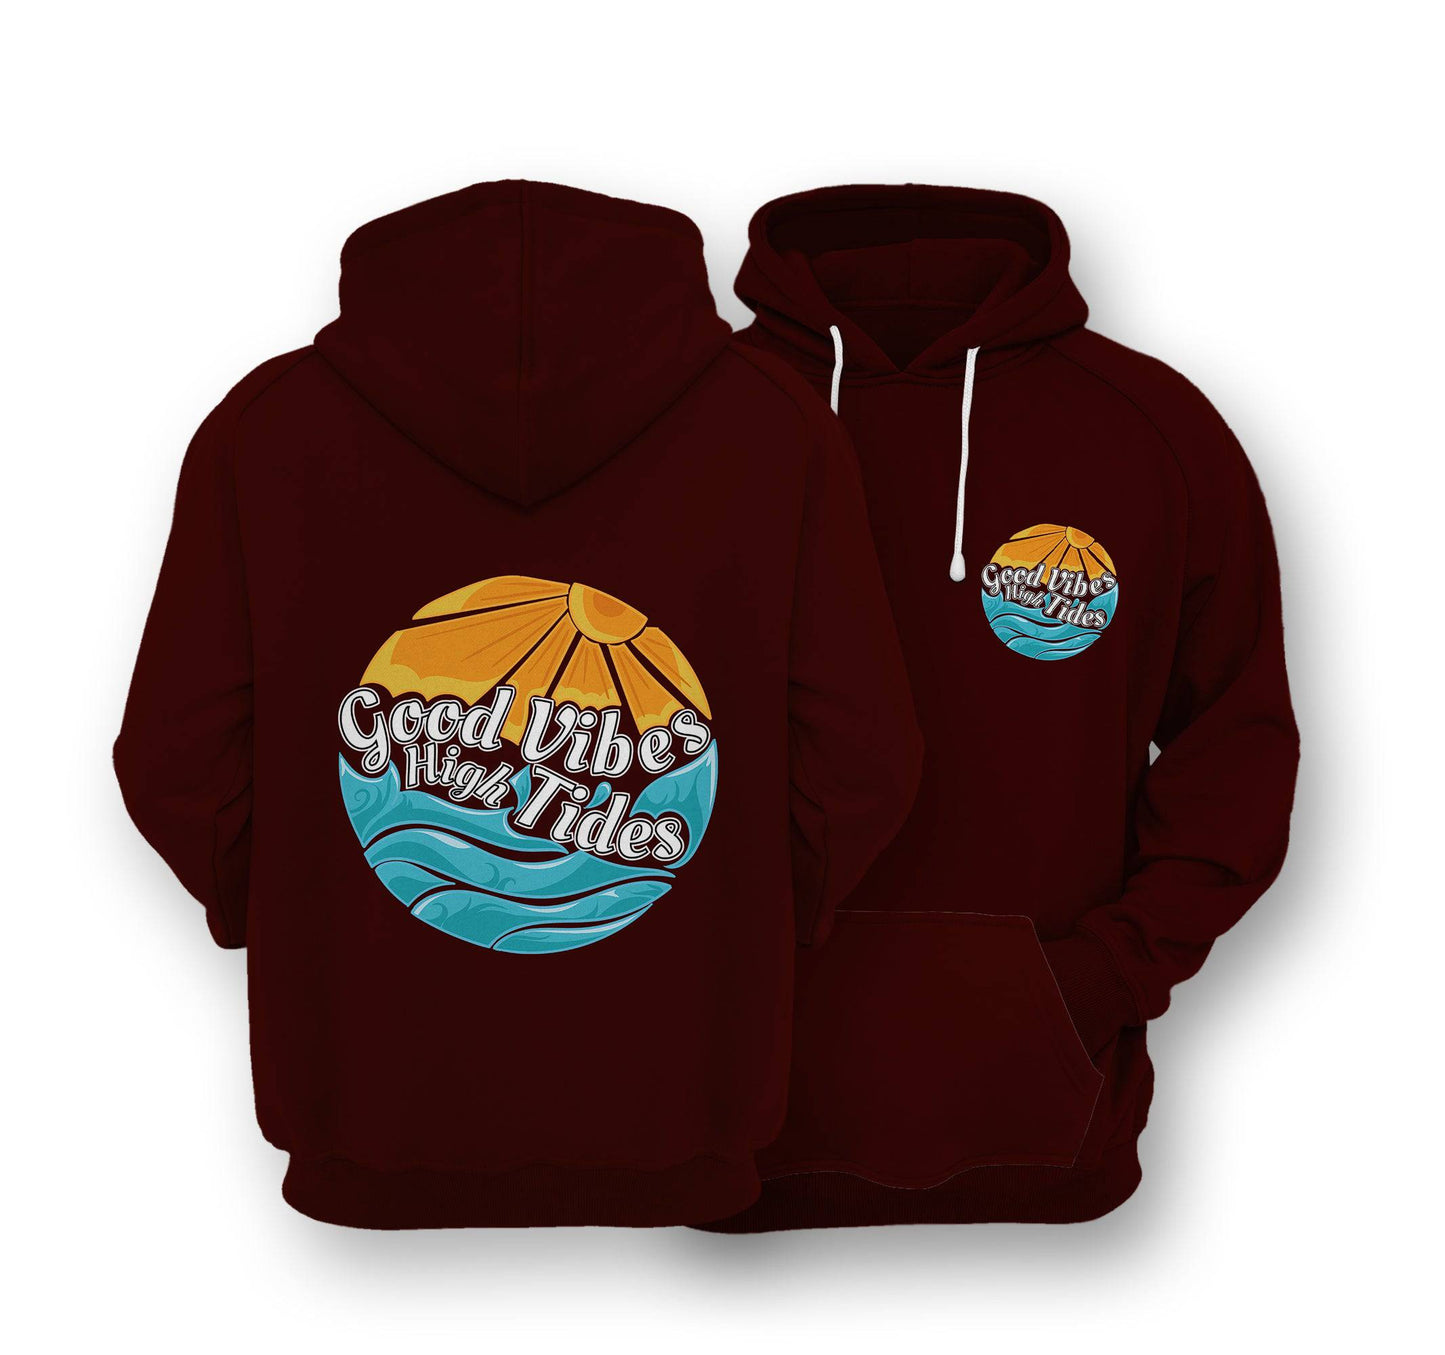 Sustainable Hoodie - Good Vibes With High Tides - One Choice Apparel